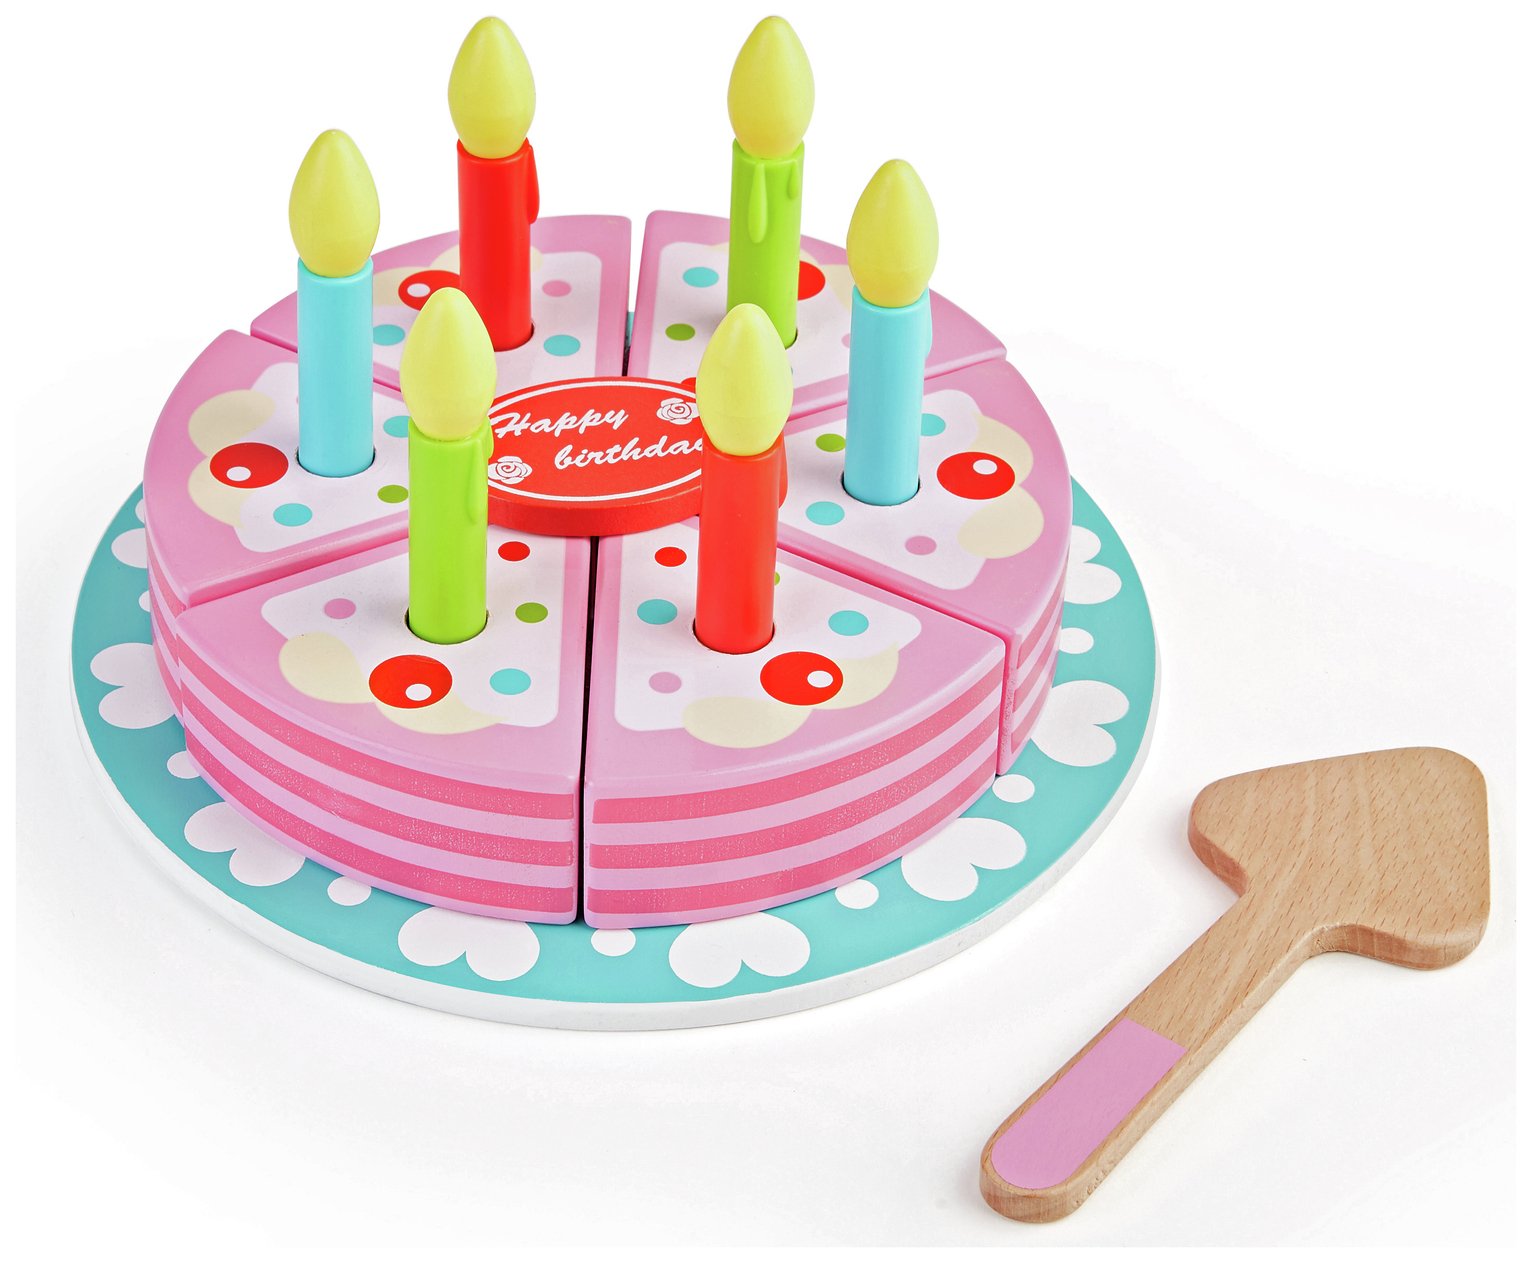 Chad Valley Wooden Birthday Cake review